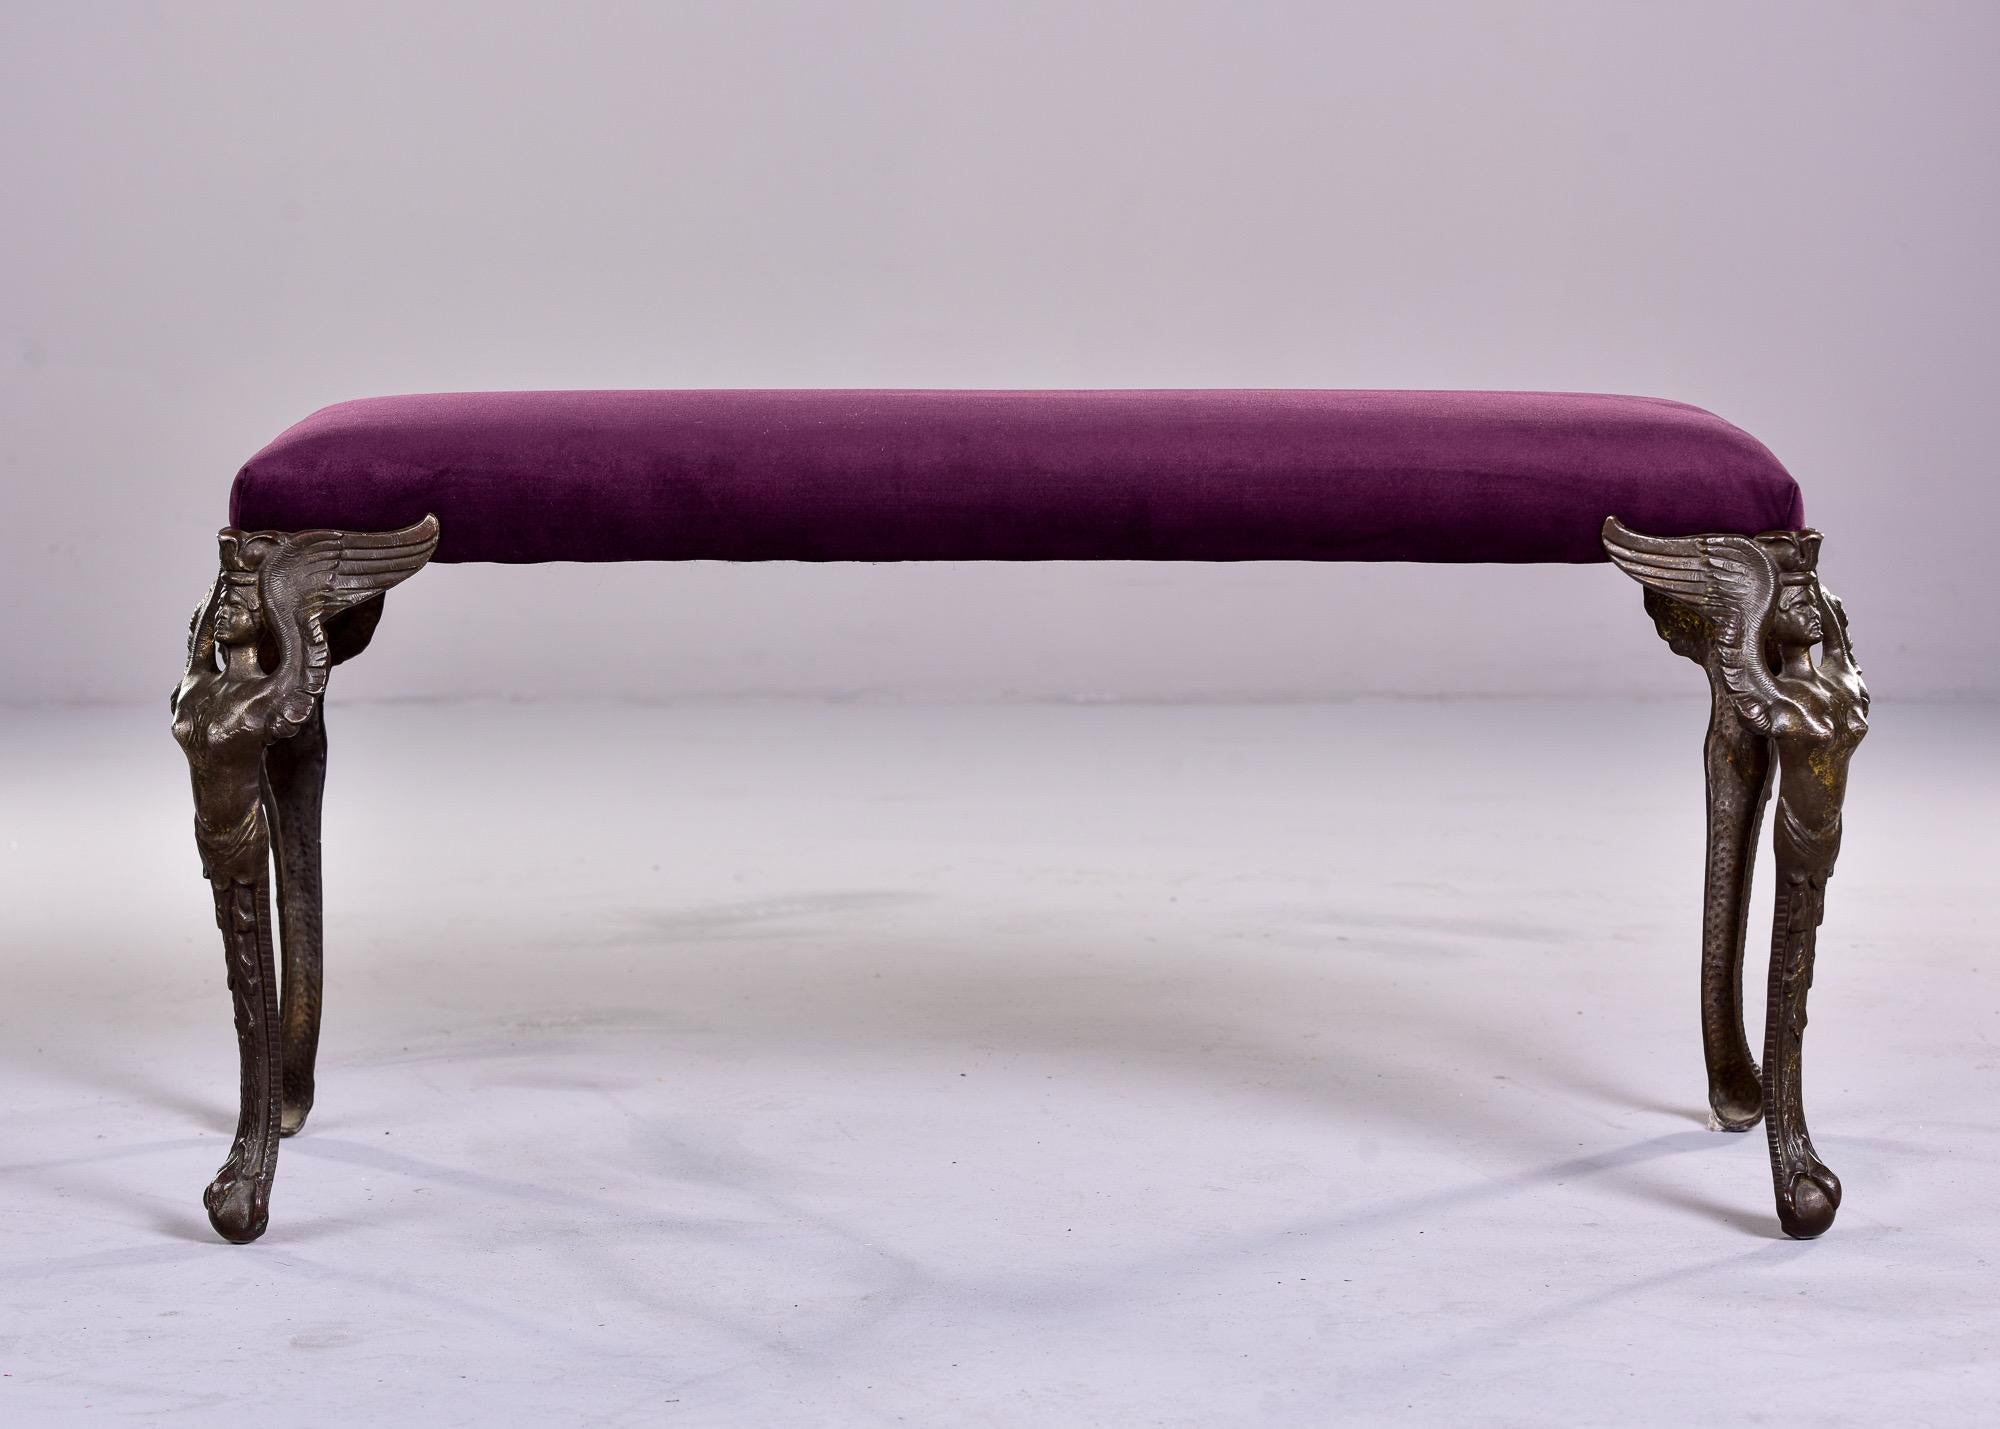 American Art Deco Bench with Cast Bronze Figural Legs and New Velvet Upholstery